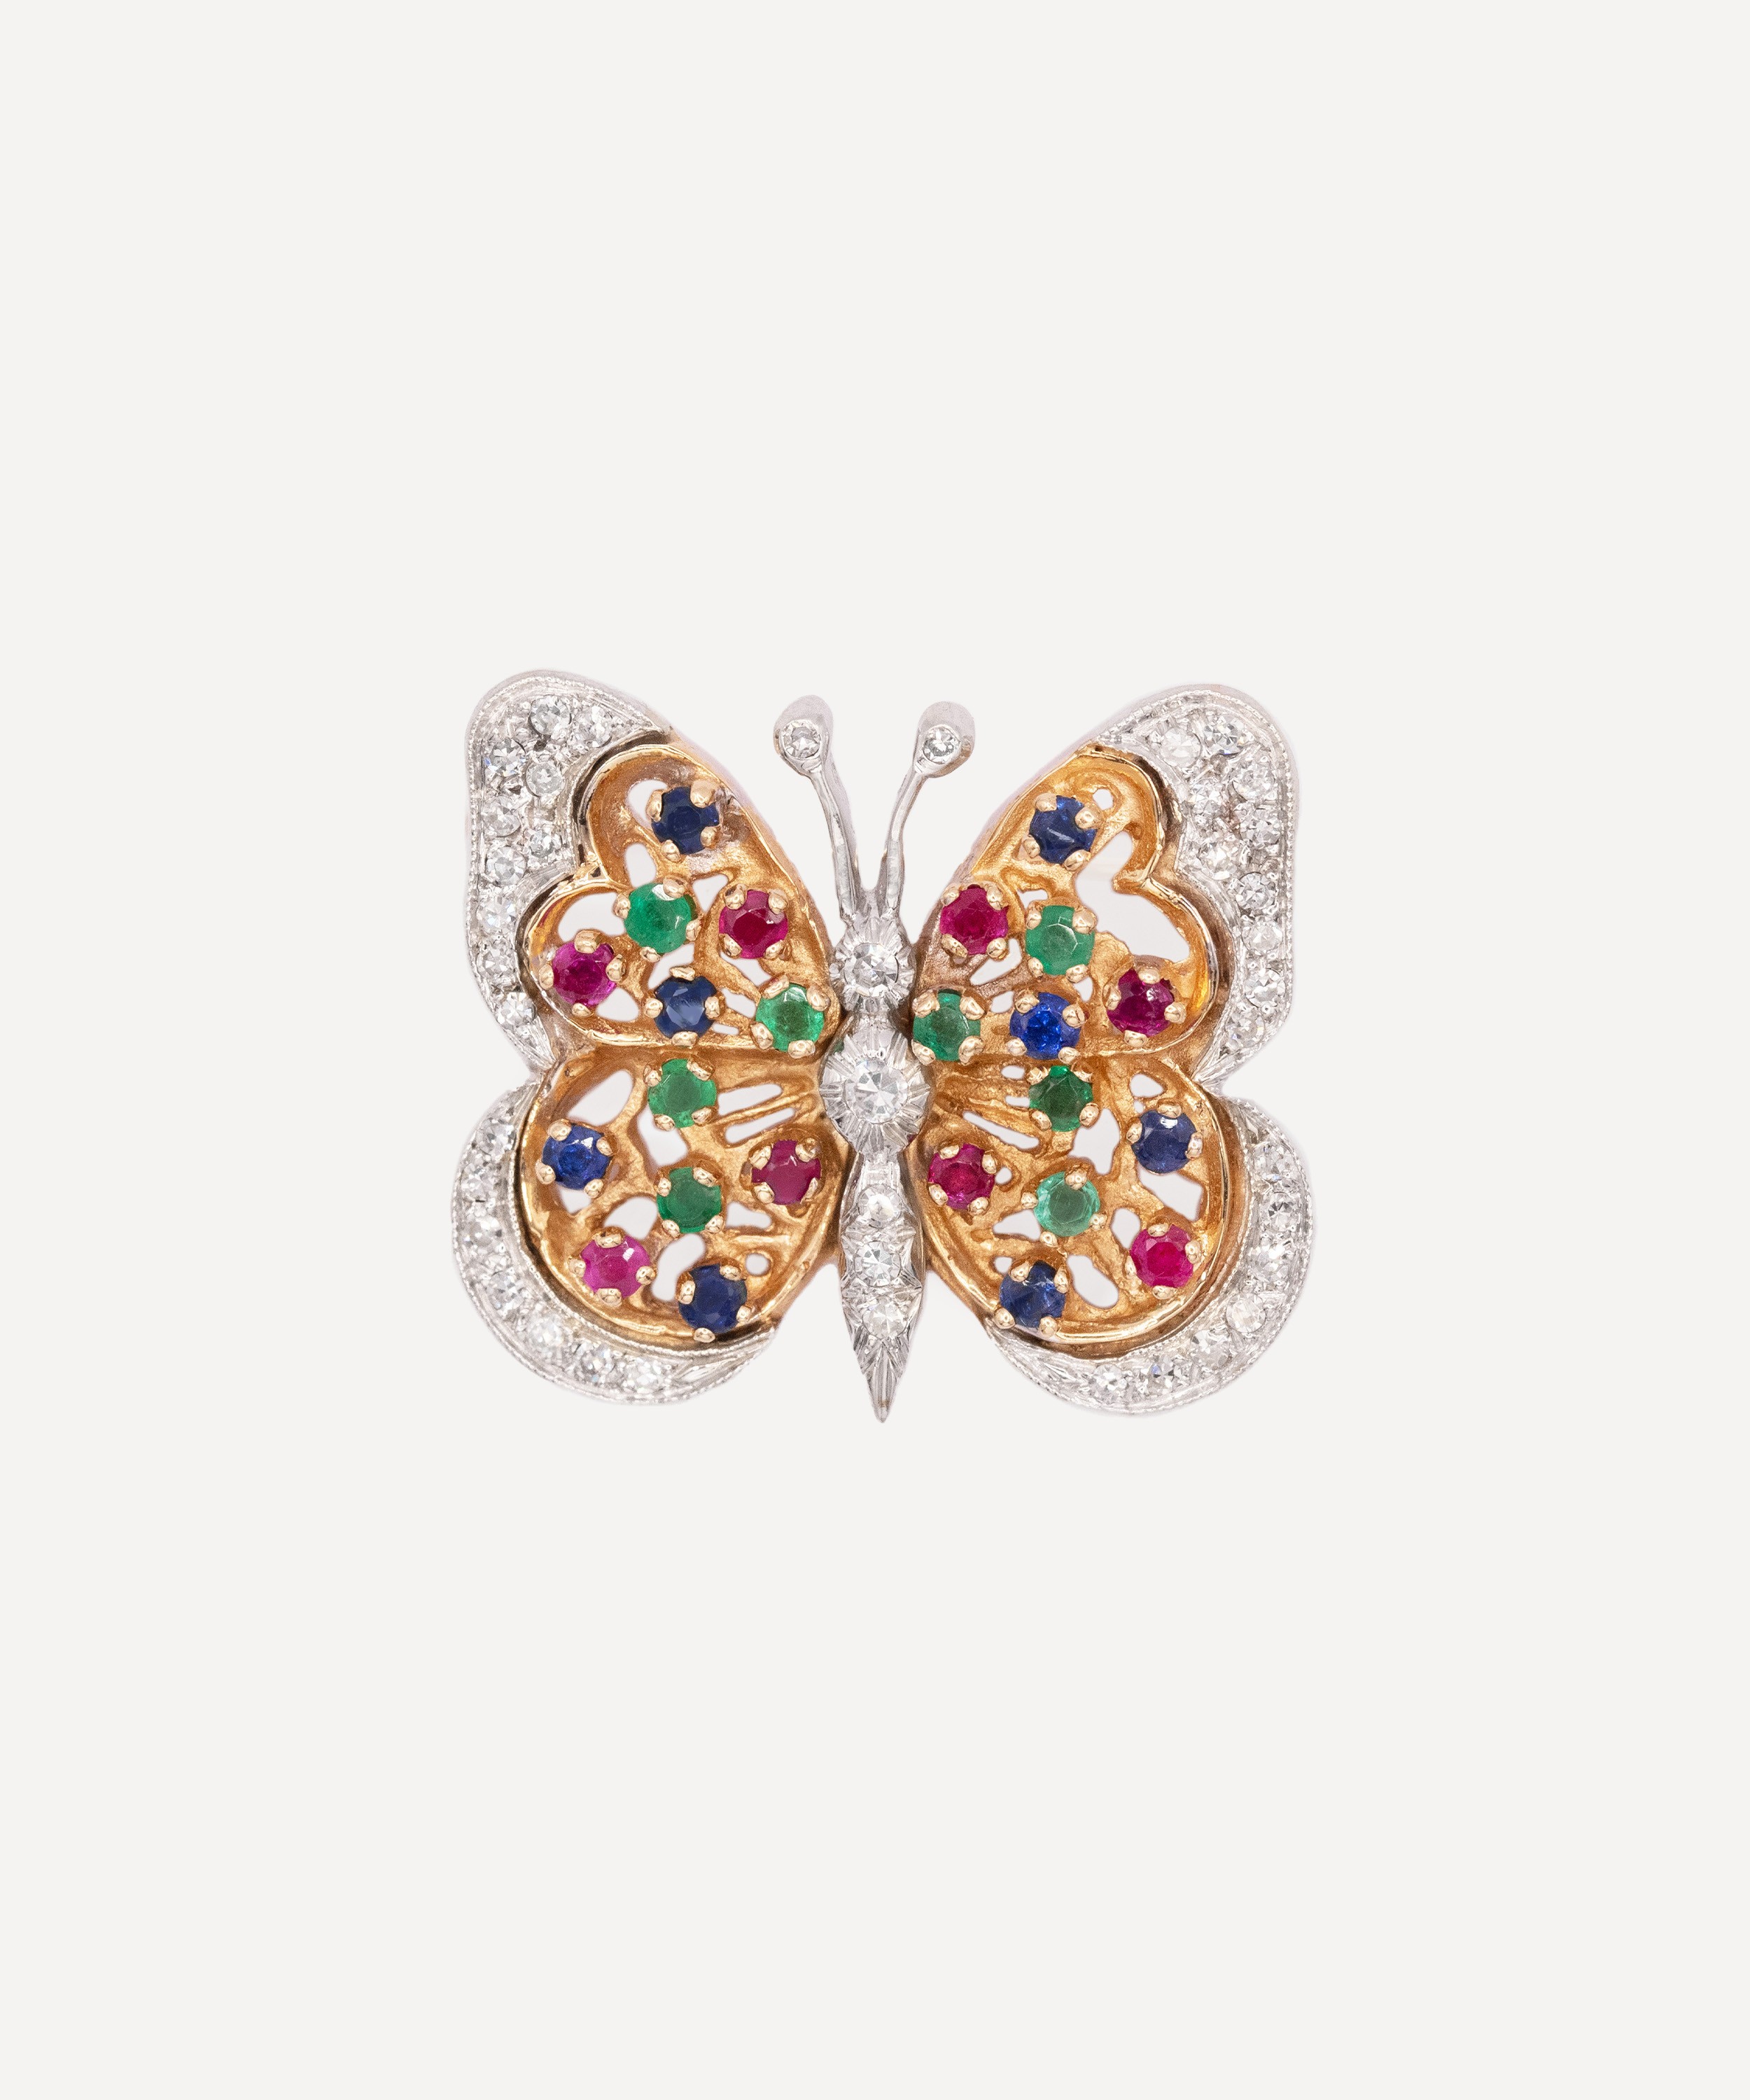 18K Yellow Gold and Platinum Multi-Gem Butterfly Pin